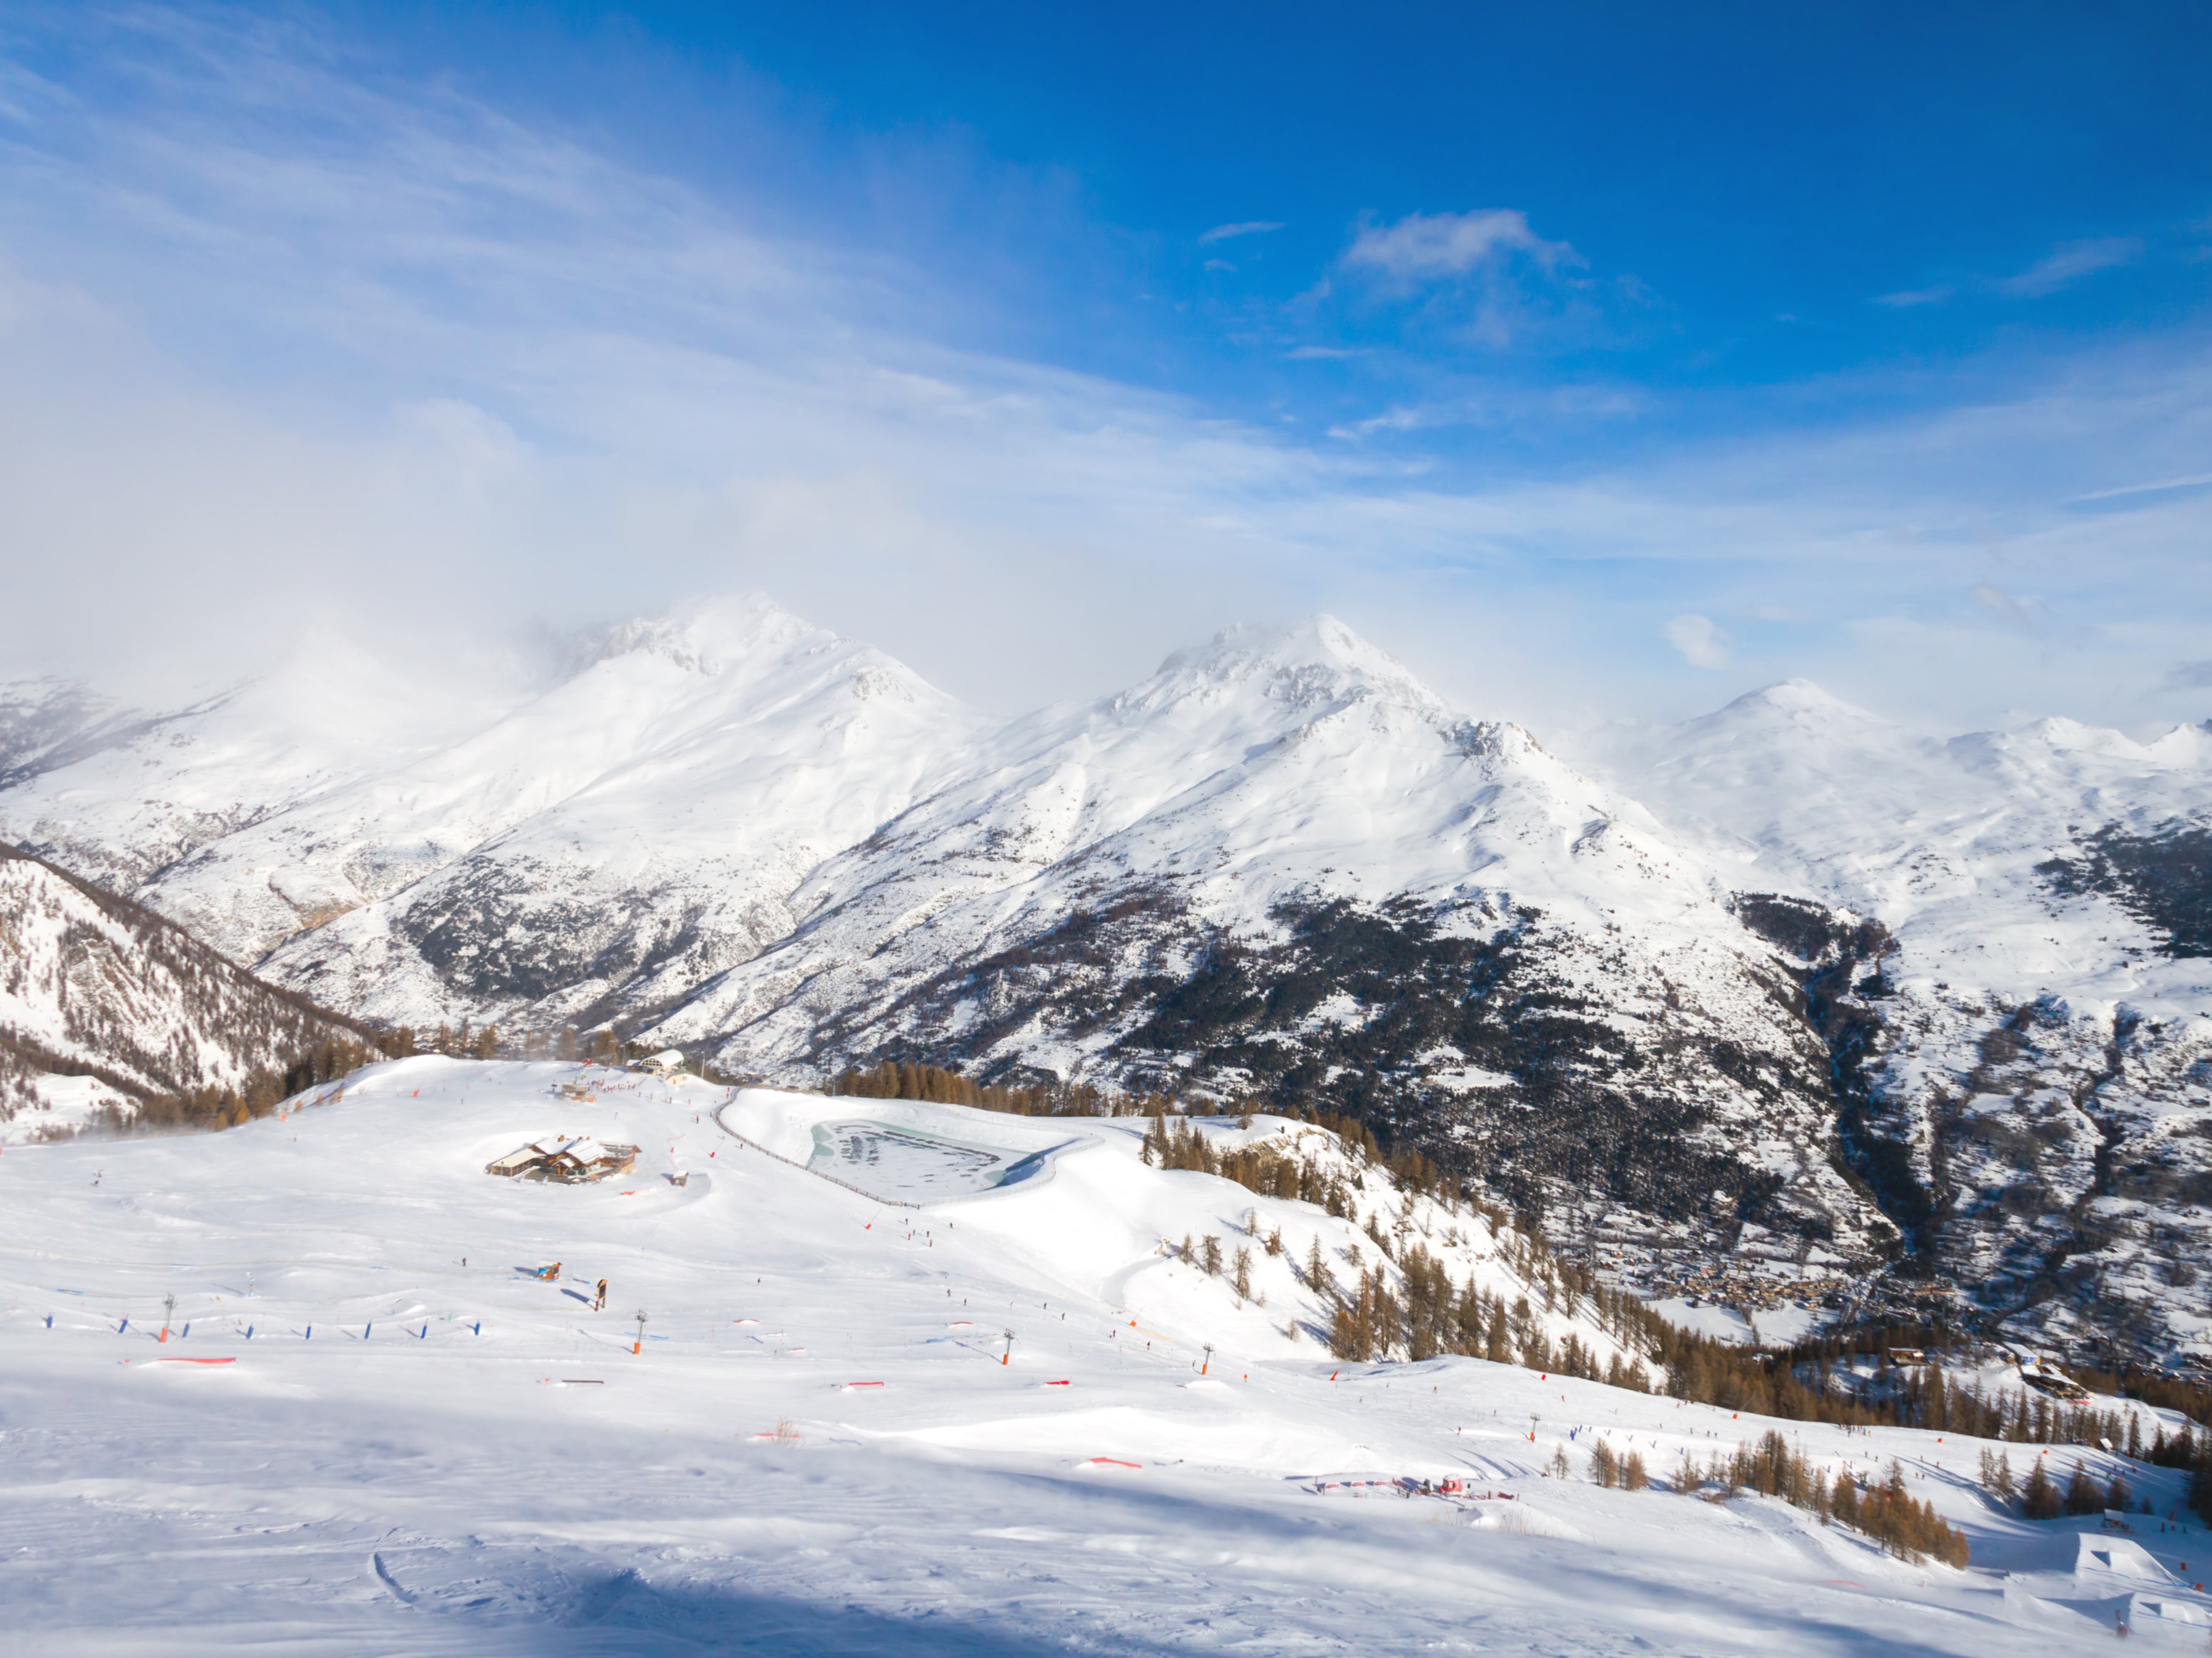 You’ll find 250km of on-piste terrain at Serre Chevalier